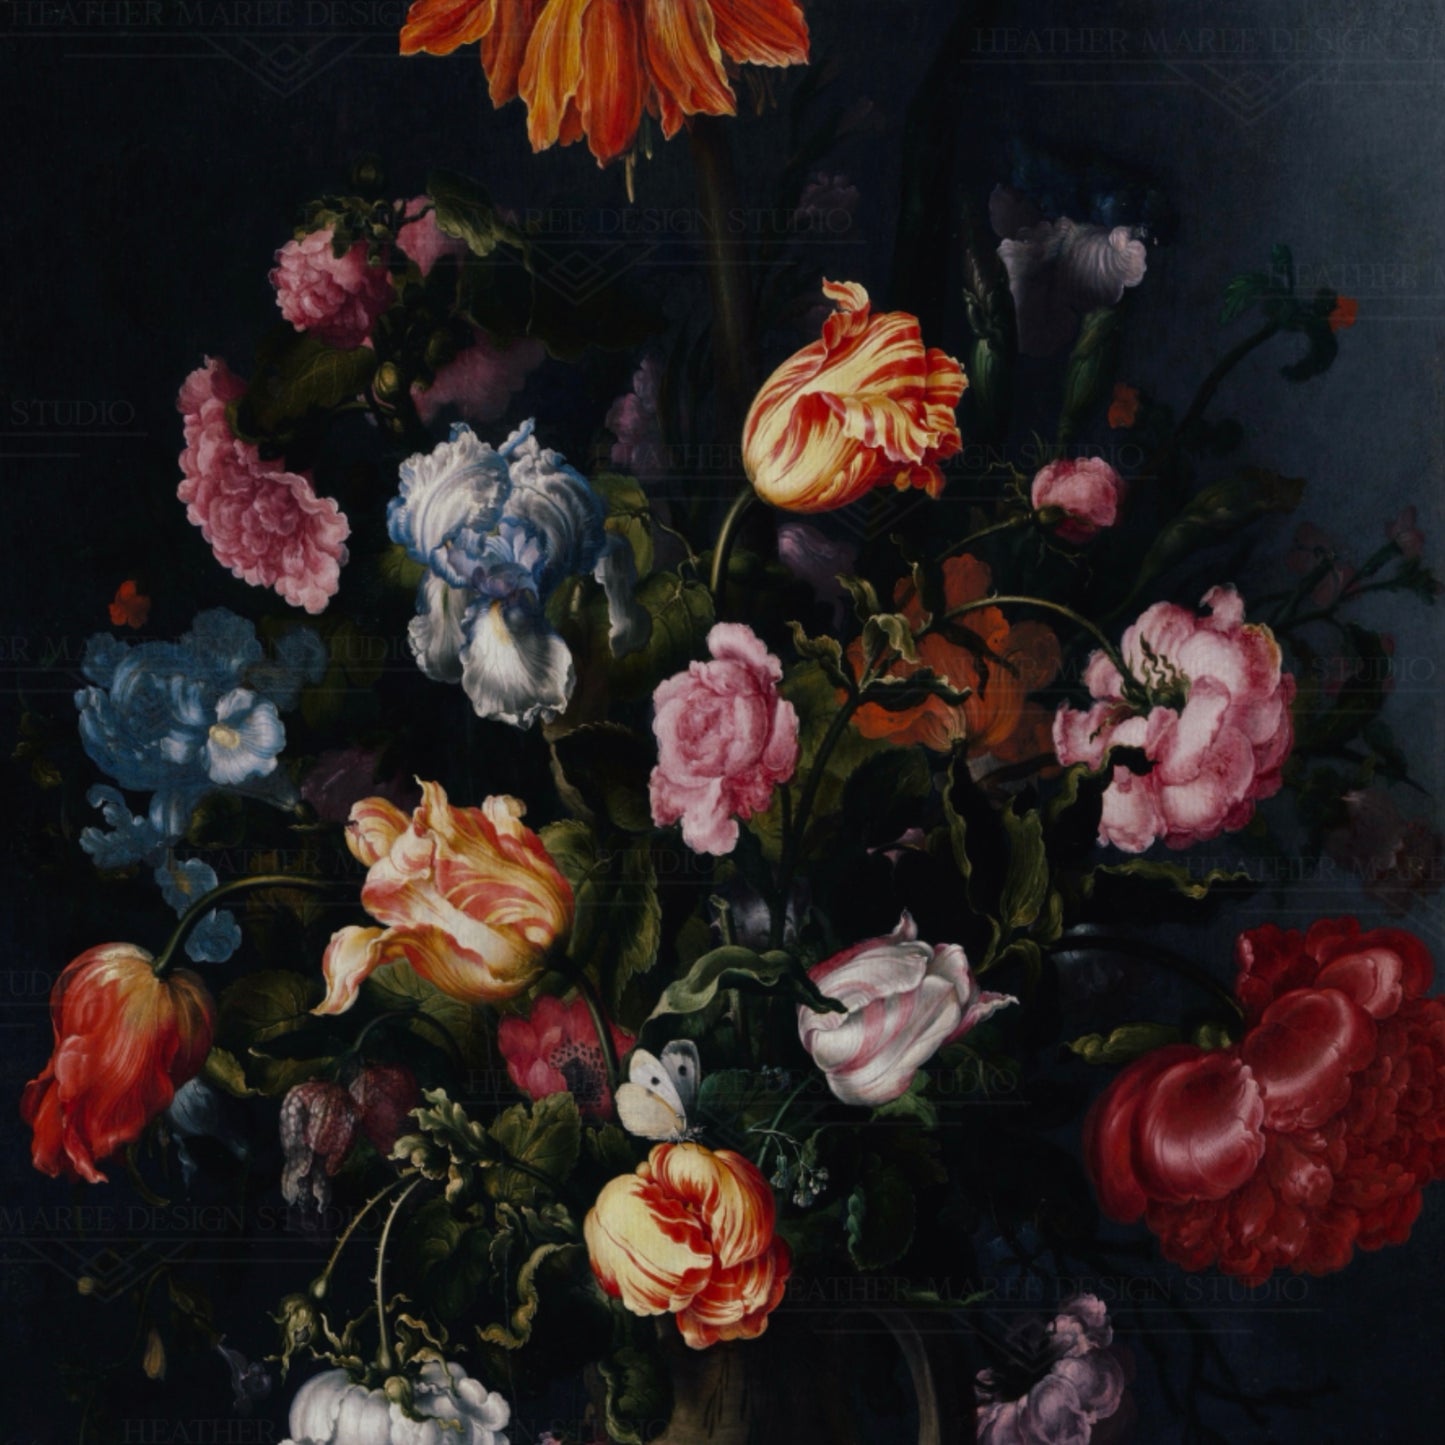 A Moody Vase with Flowers